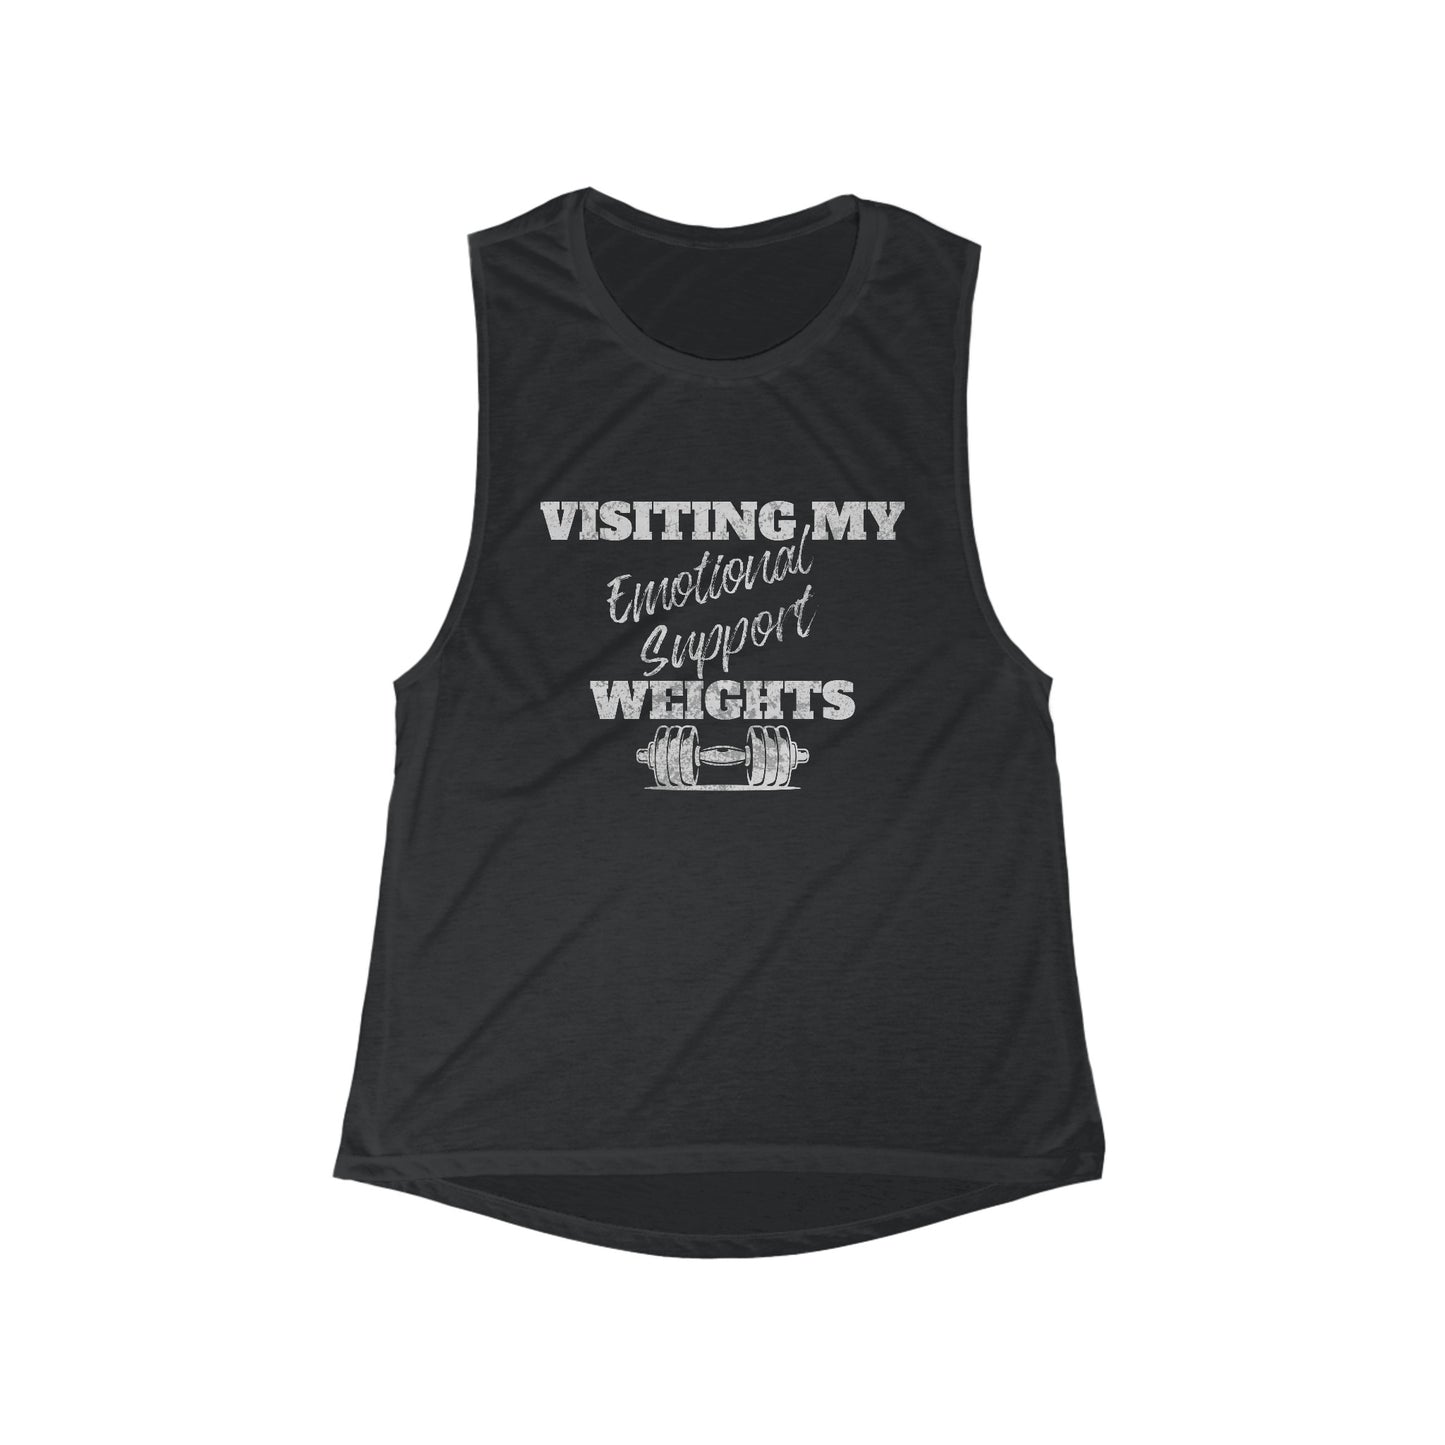 Emotional Support Weights Women's Flowy Scoop Muscle Tank